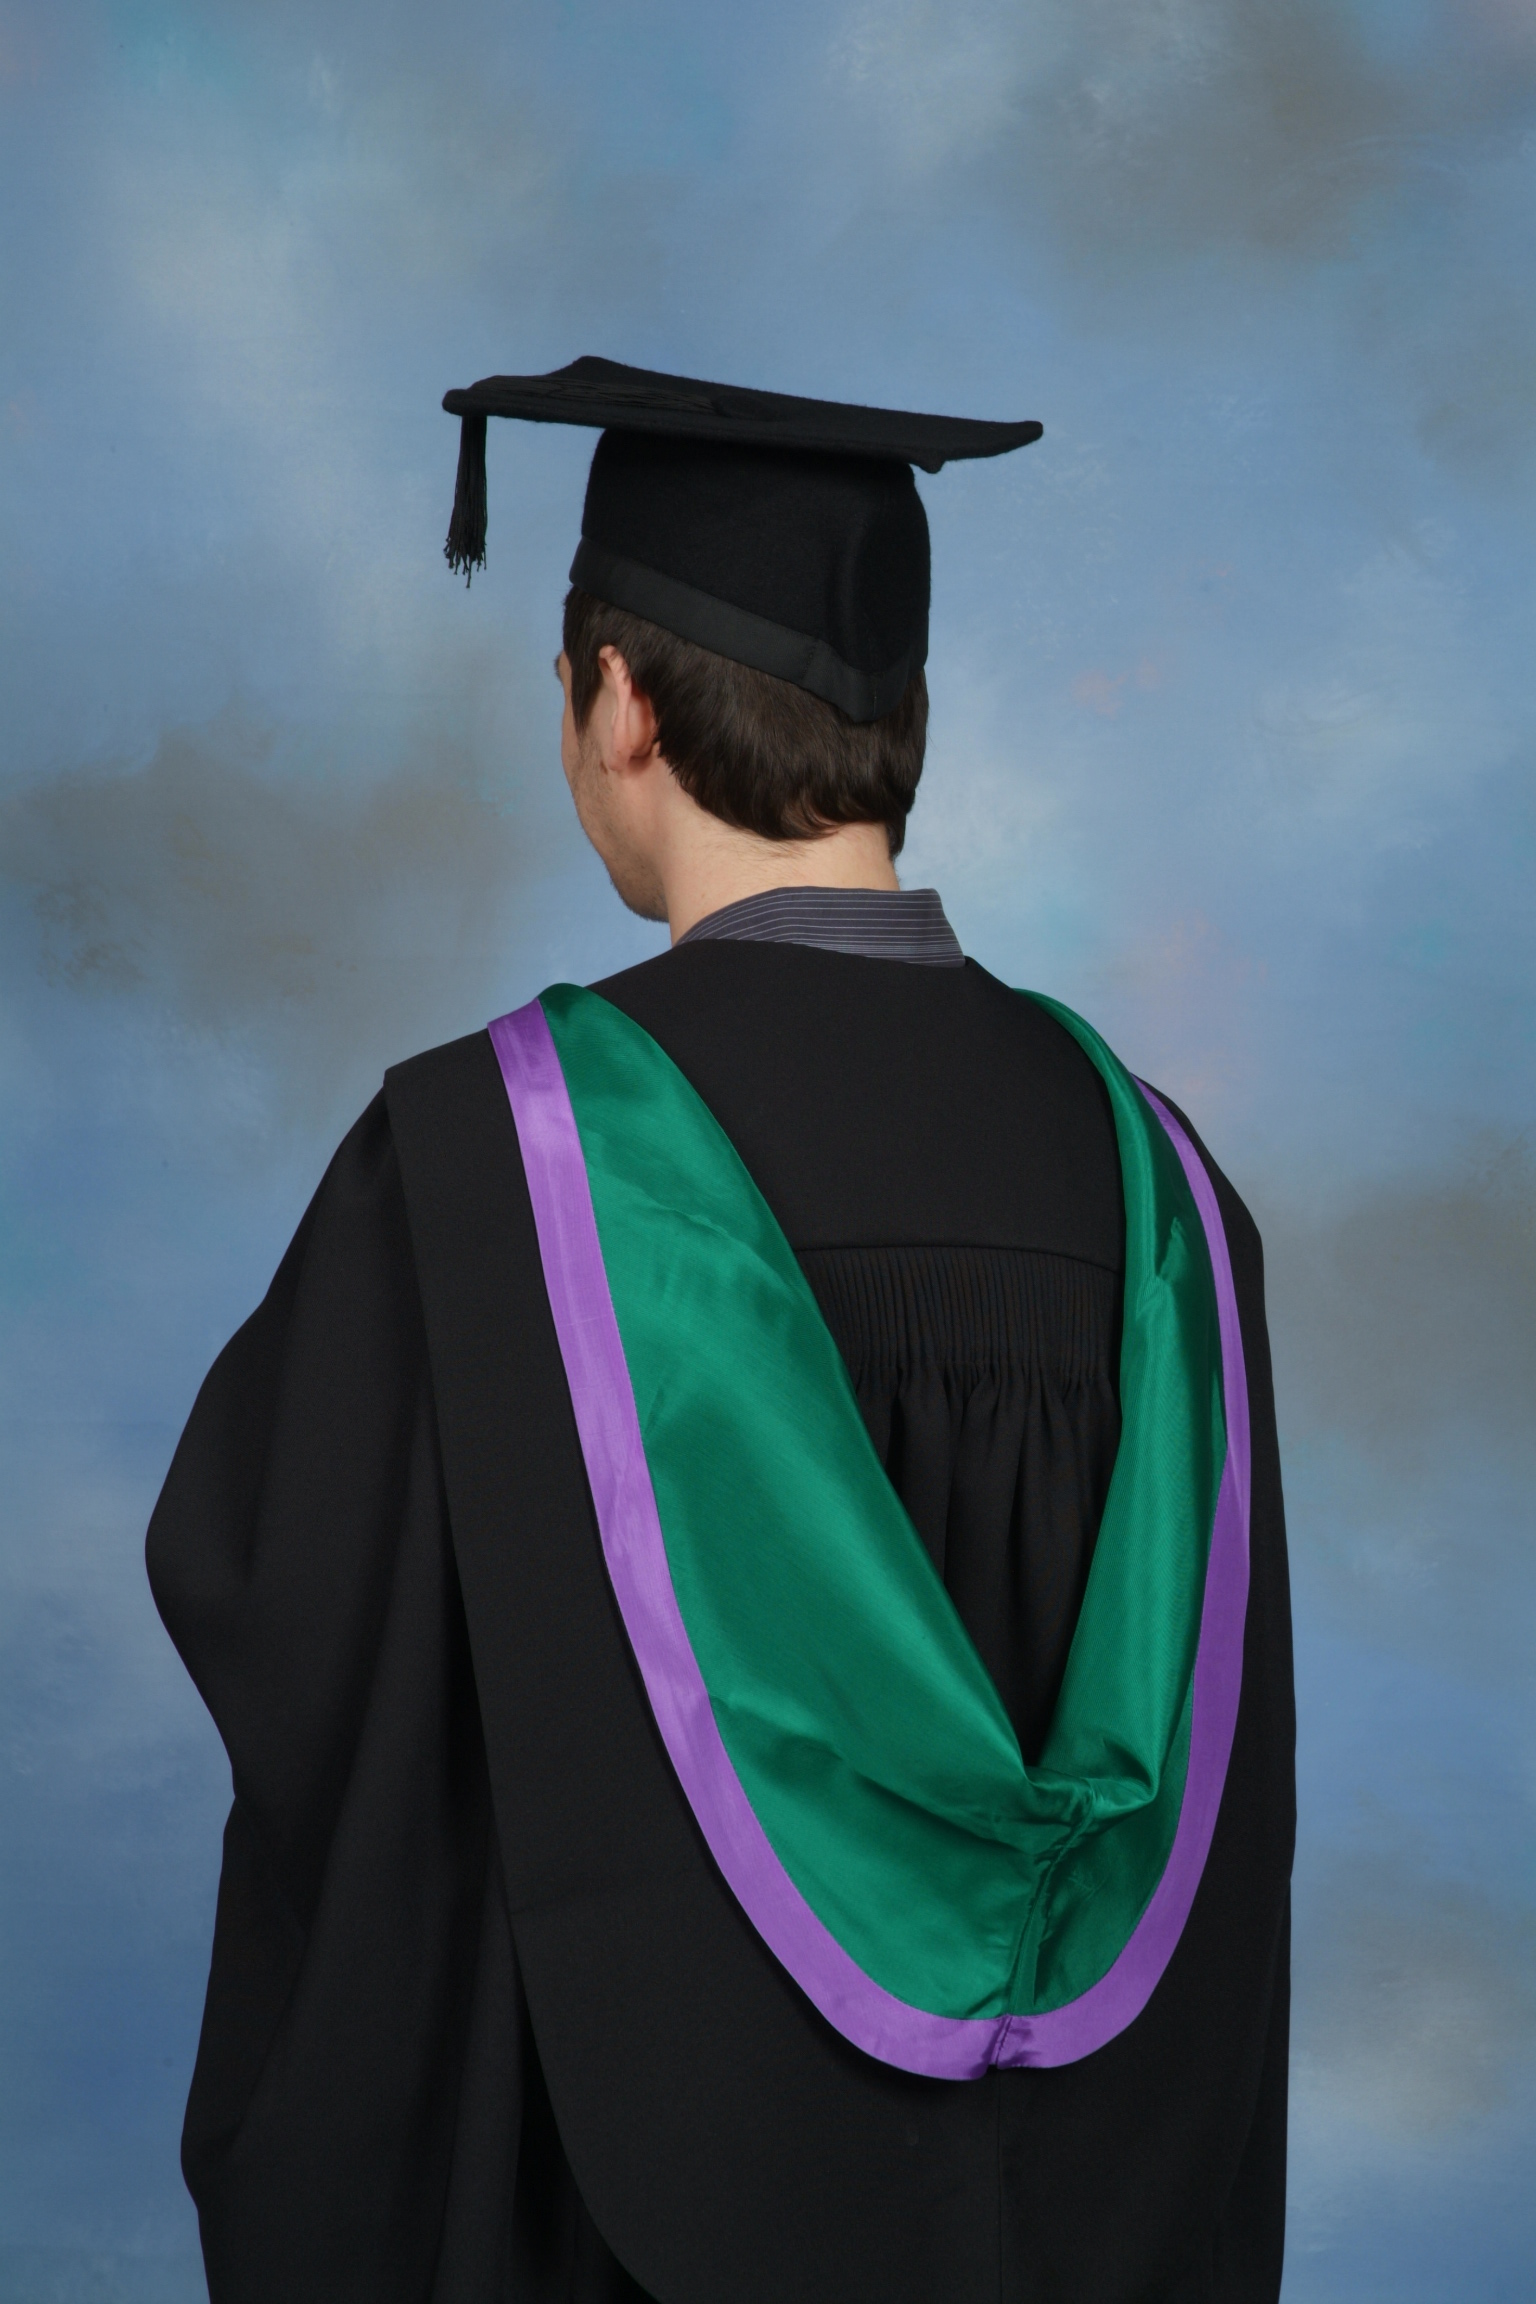 The robe worn by Bachelor Degree graduands.